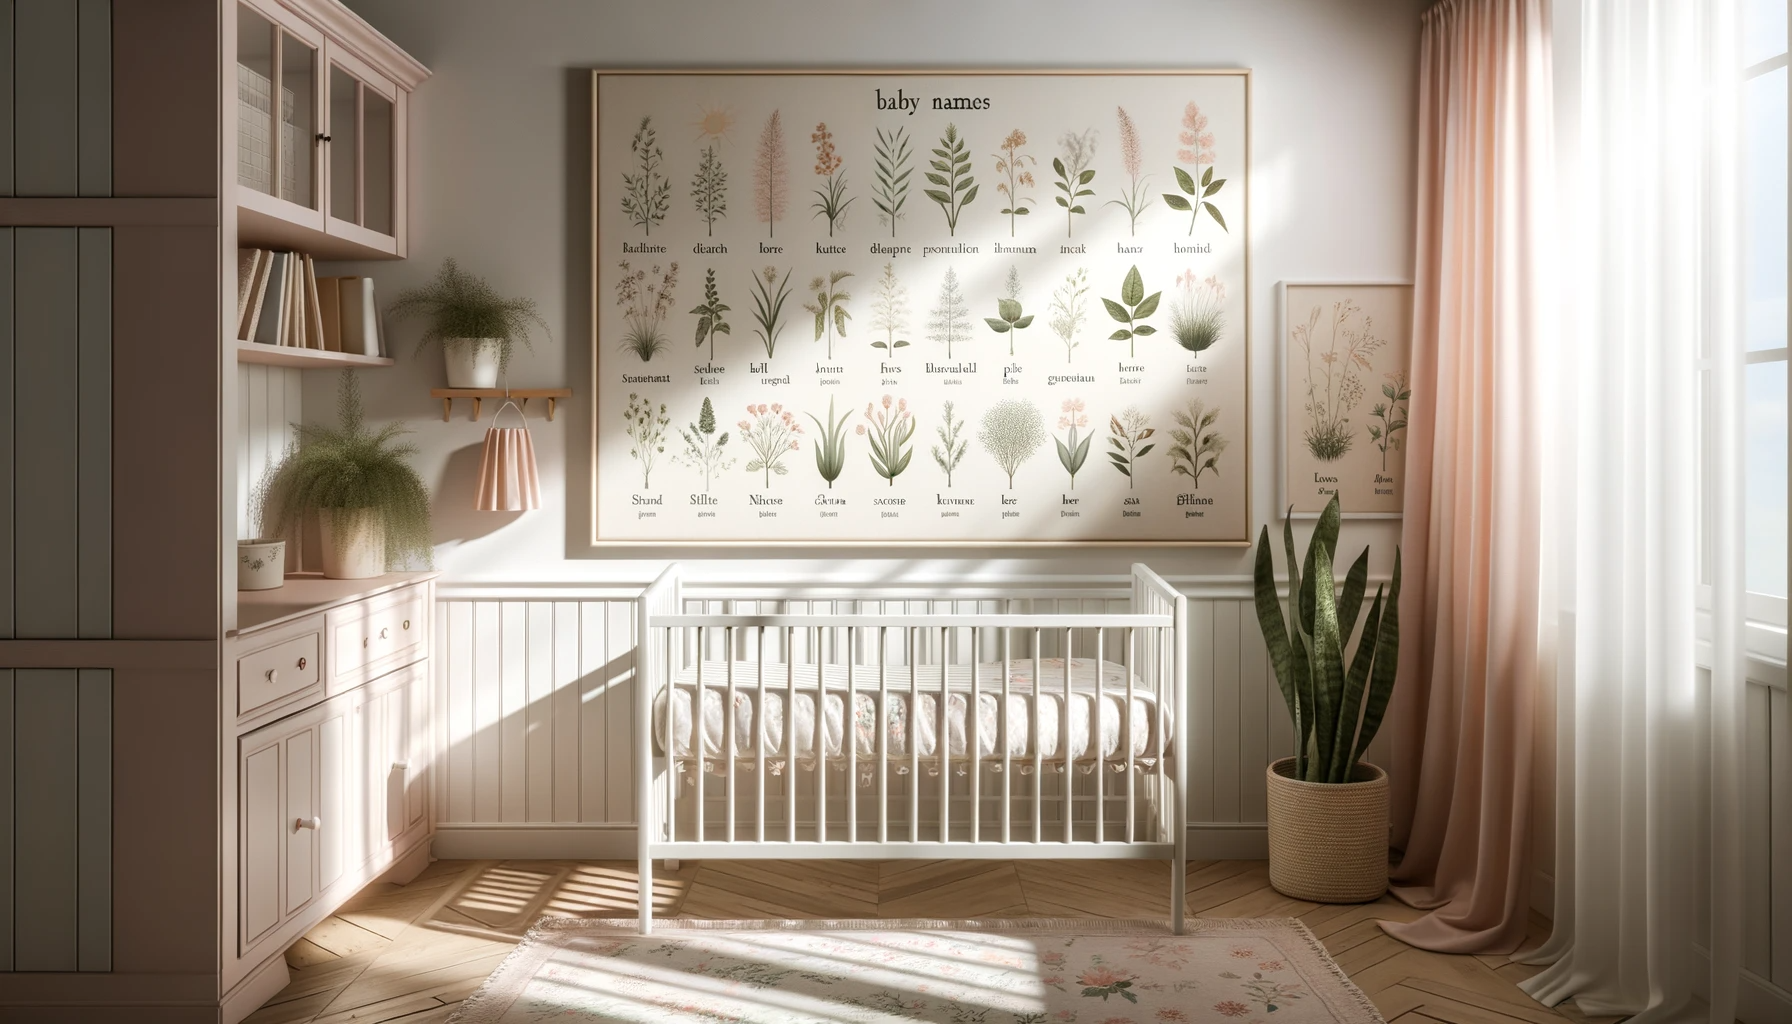 baby names inspired by plants